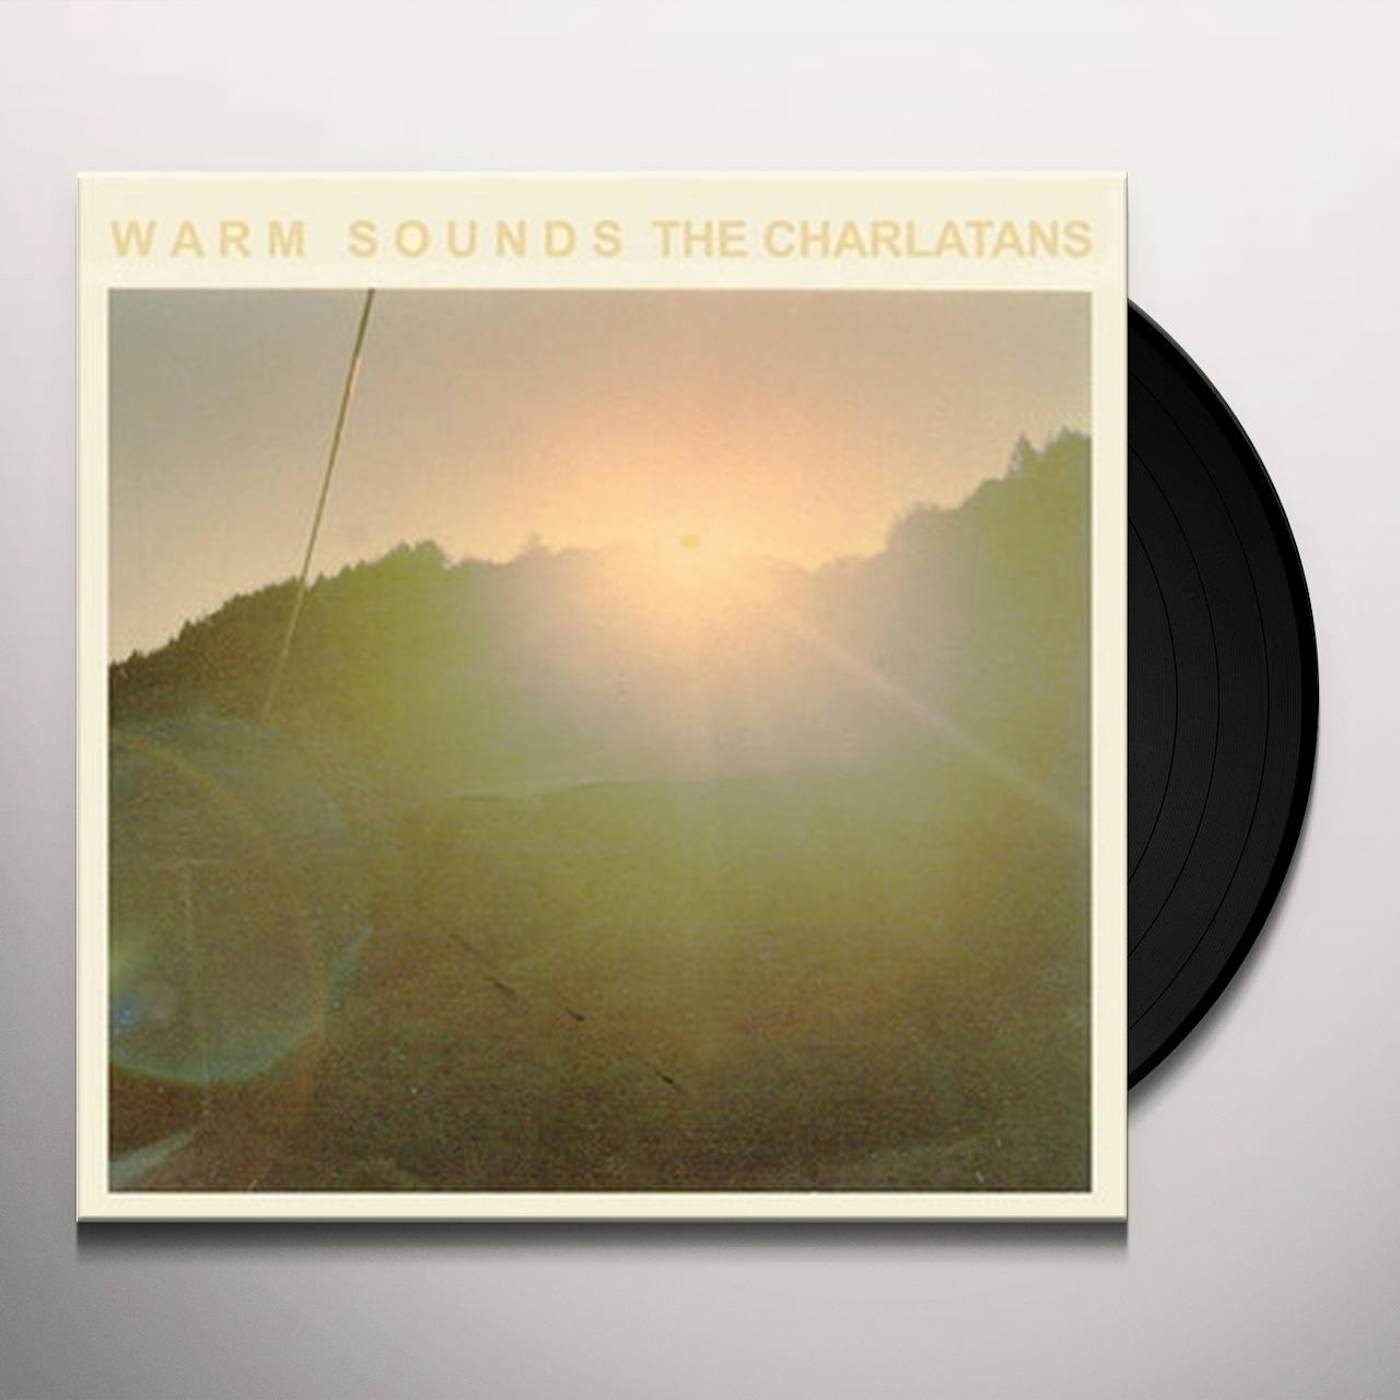 The Charlatans WARM SOUNDS Vinyl Record